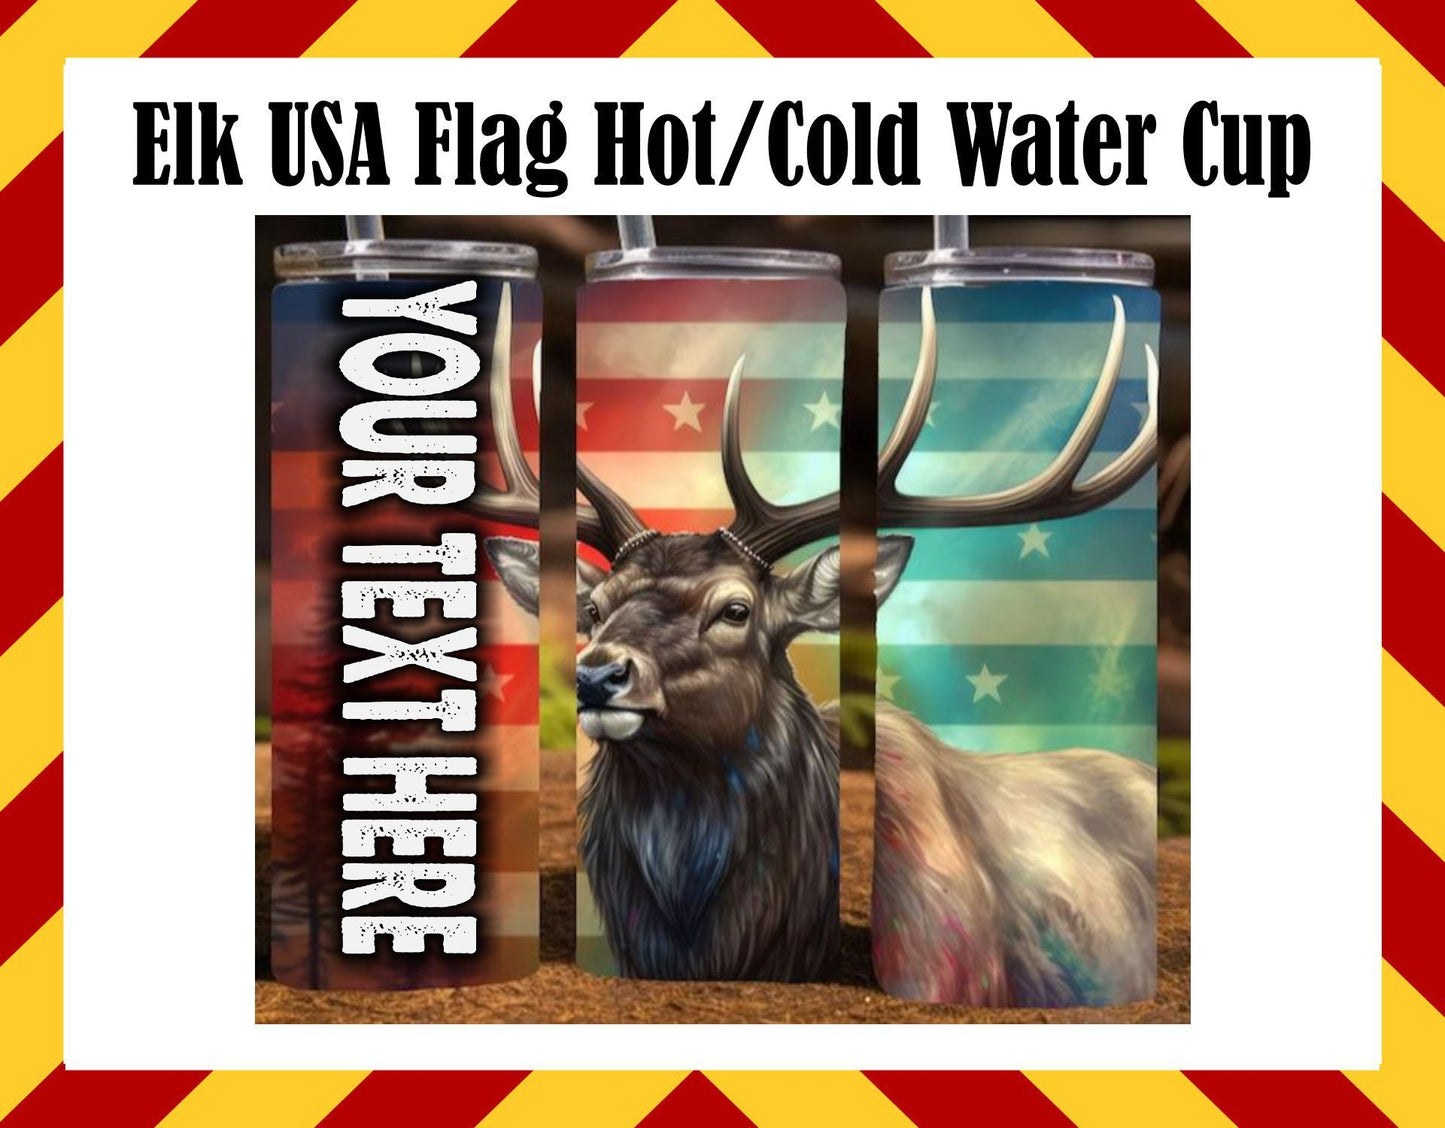 Stainless Steel Cup -  Elk USA Flag Stainless Steel Cup - Hot/Cold Cup